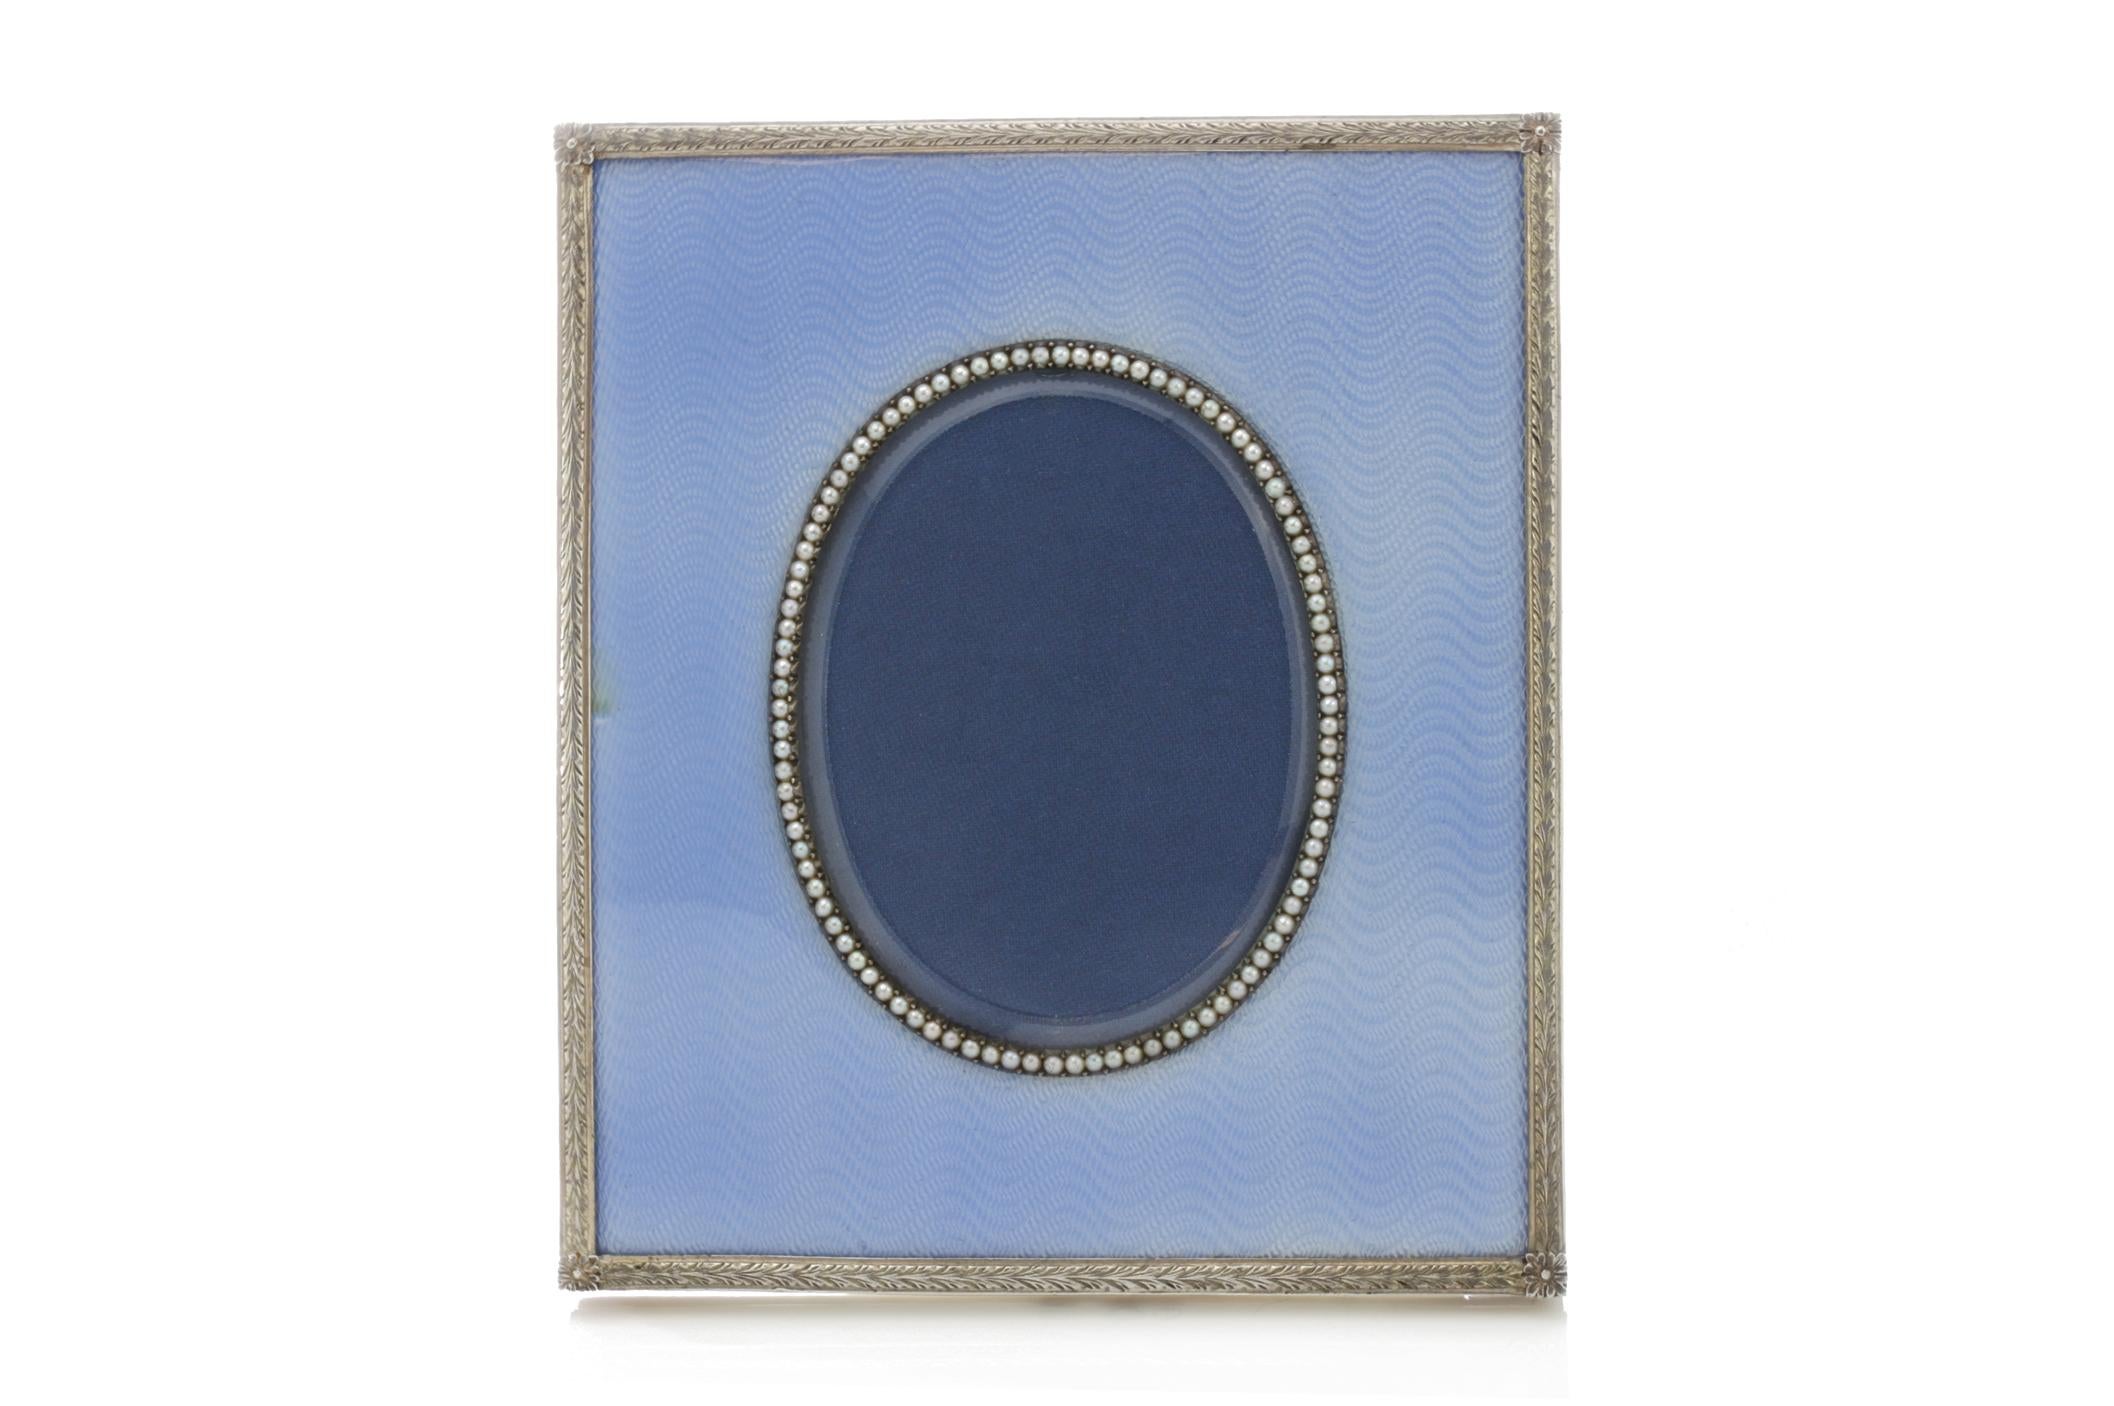 Faberge Silver and Guilloché Enamel Frame, 1900 by Mikhail Perkhin 1